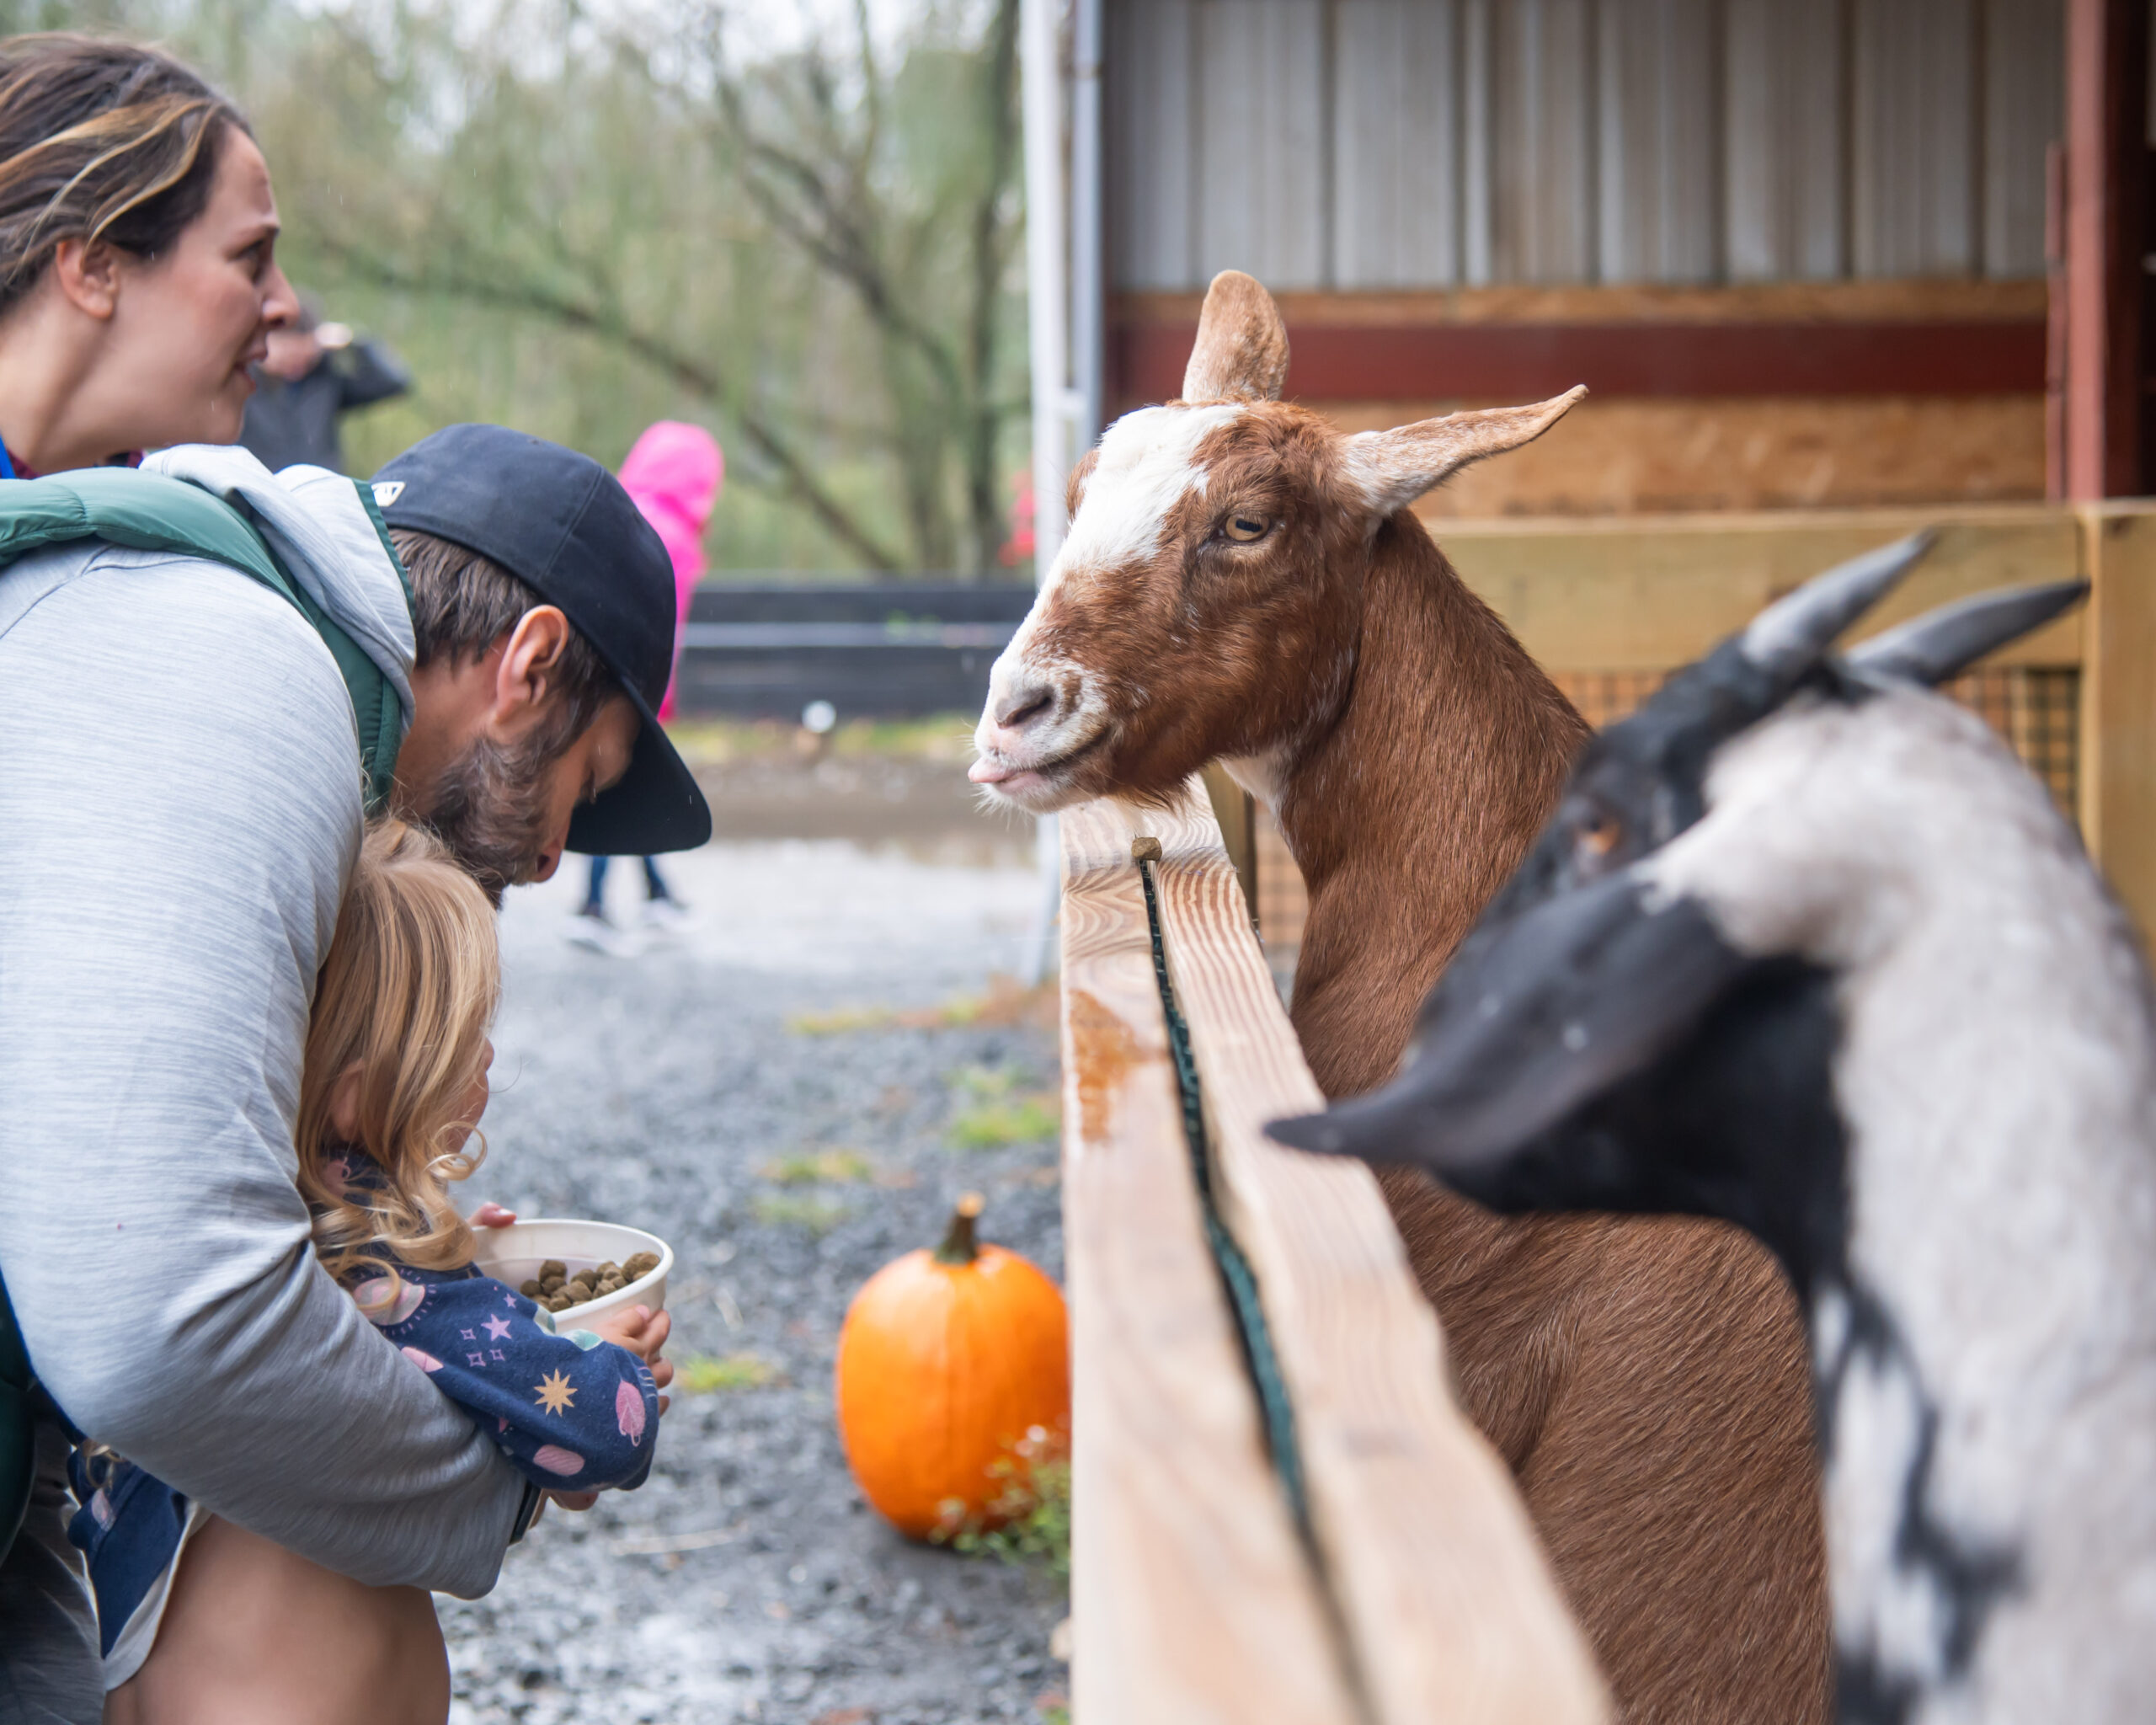 These goats were ready for some extra treats! Both children and adults had a blast handfeeding them. 